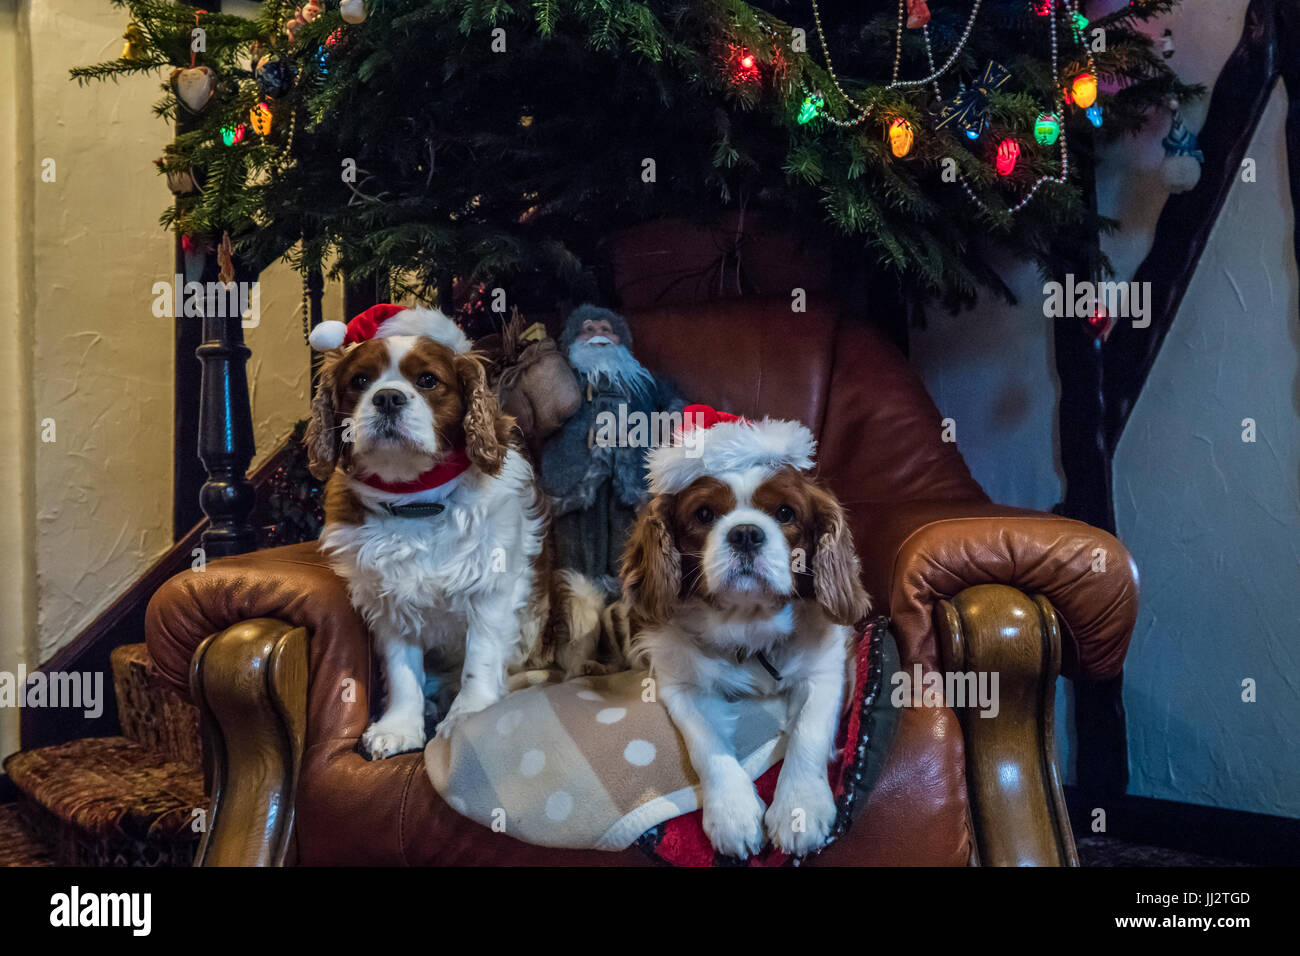 Cavalier King Charles Spaniels with Christmas hats sitting under a Christmas tree. Stock Photo